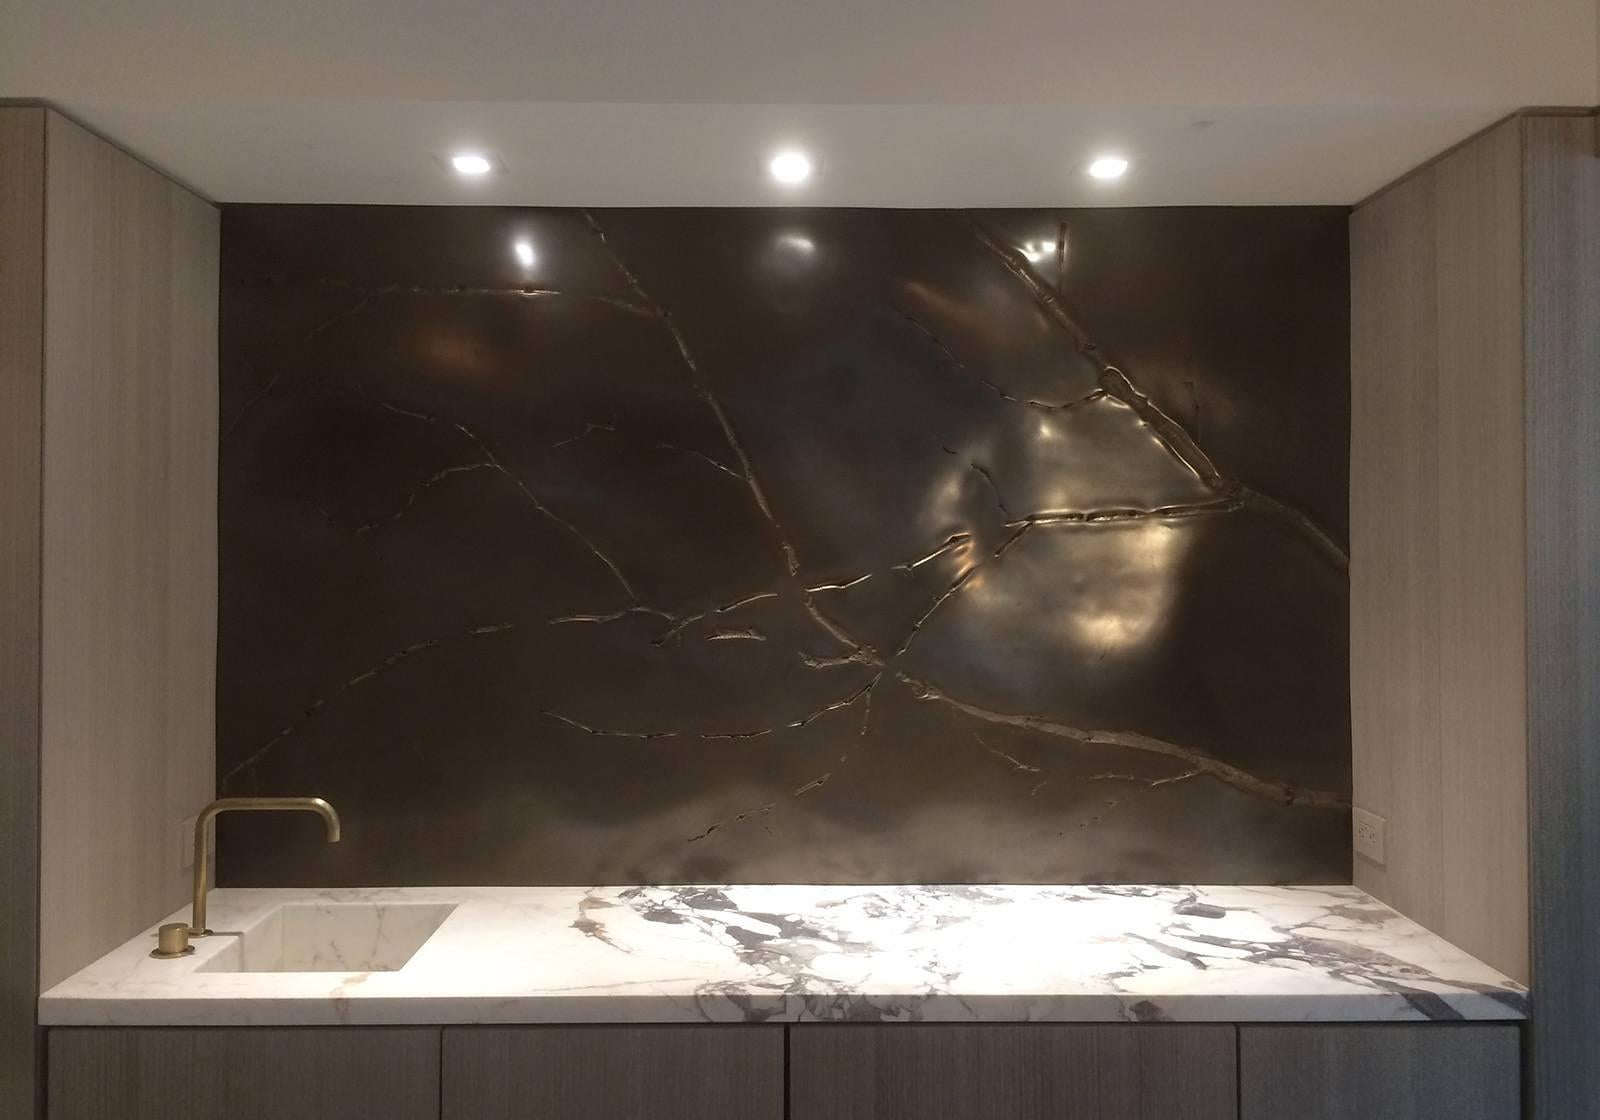 Of unparalleled stature and rarefied beauty is this bronze surface art which features the high texture of branches in relief against austere atmospherics of a polished undulating field. The countering natures in this Minimalist vocabulary create